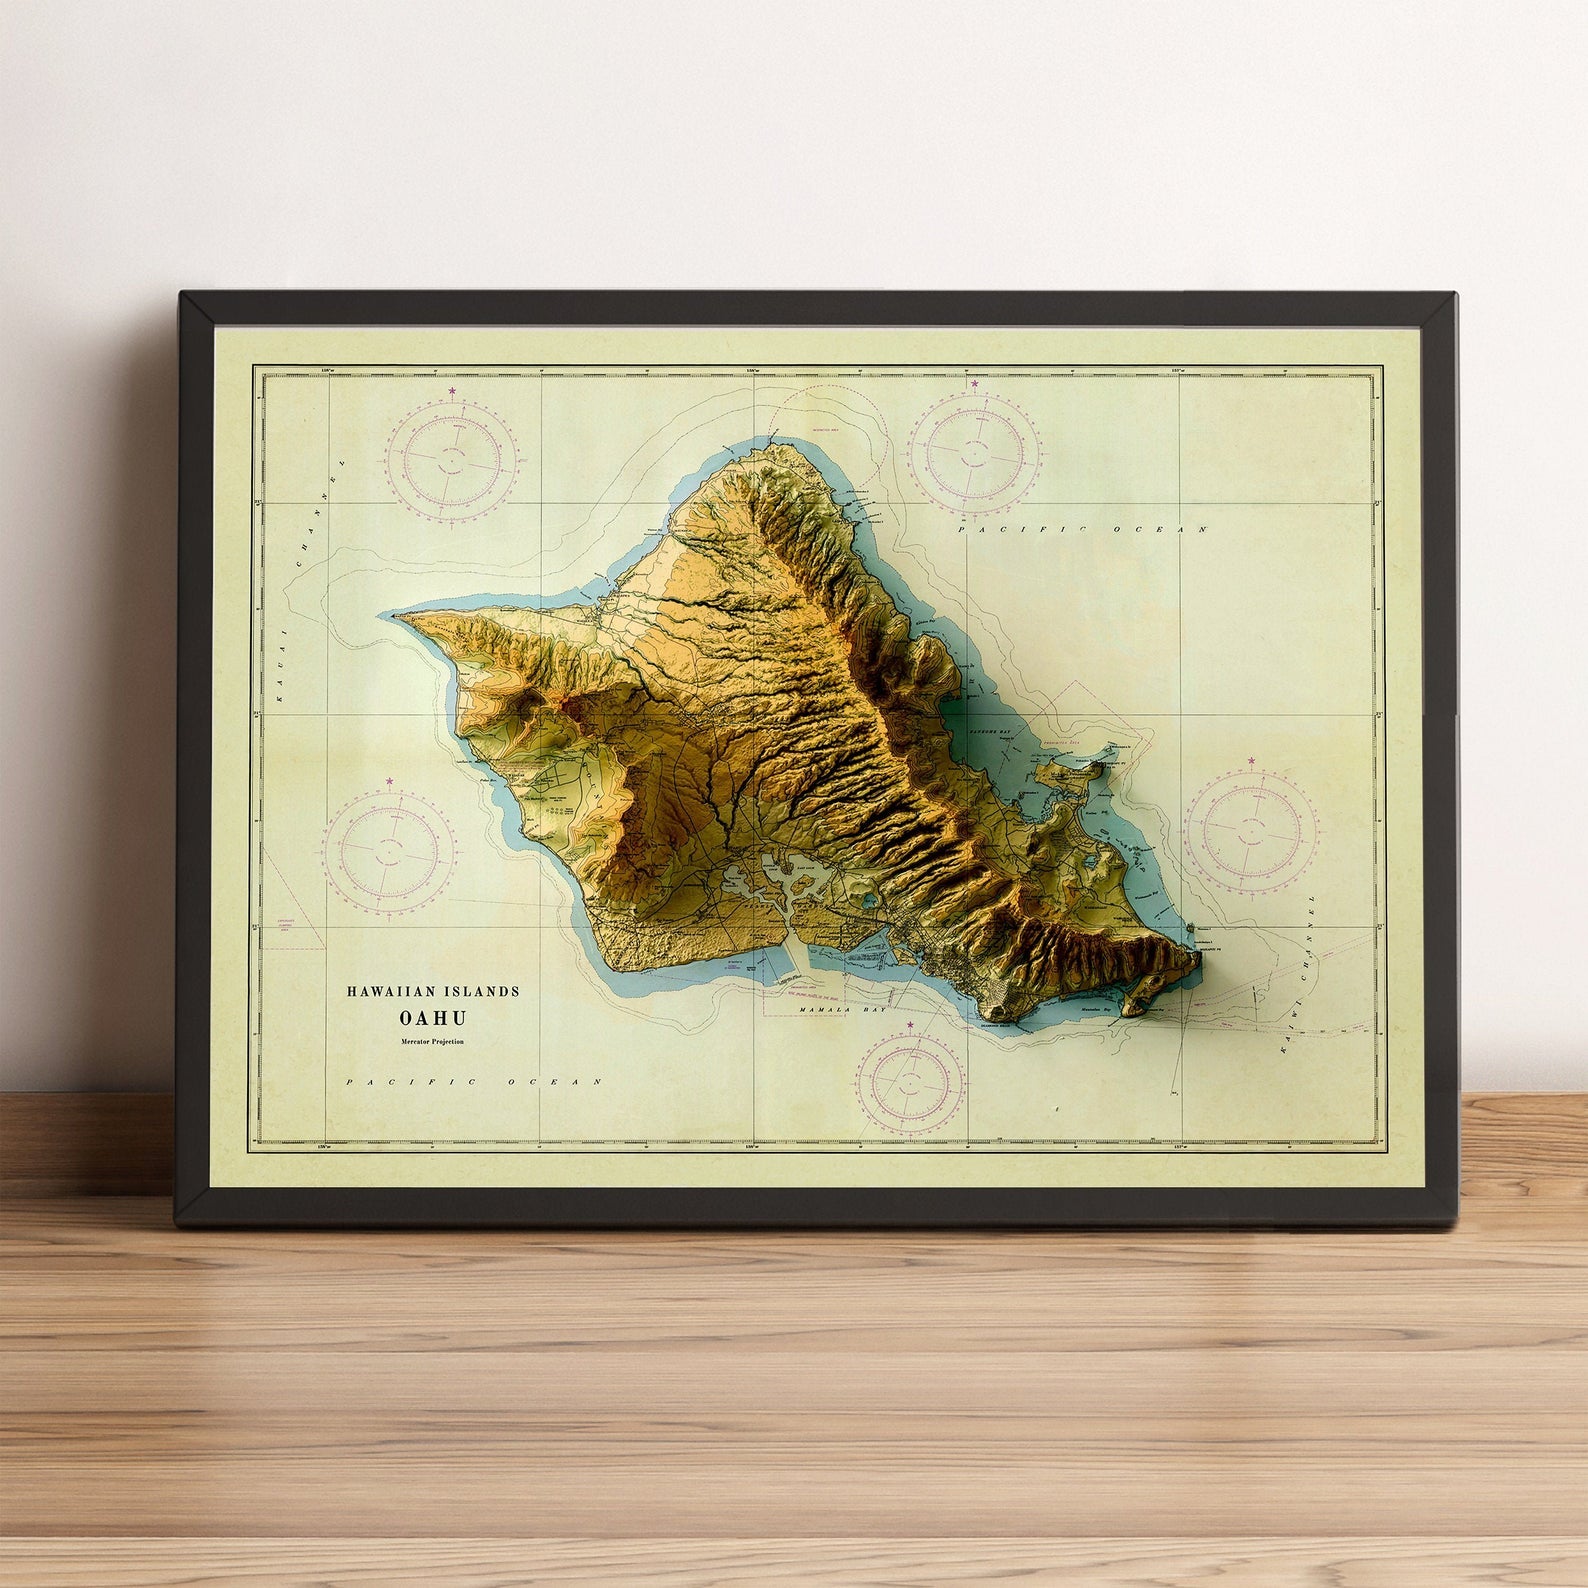 Image showing a vintage relief of the hawaiian island of Oahu